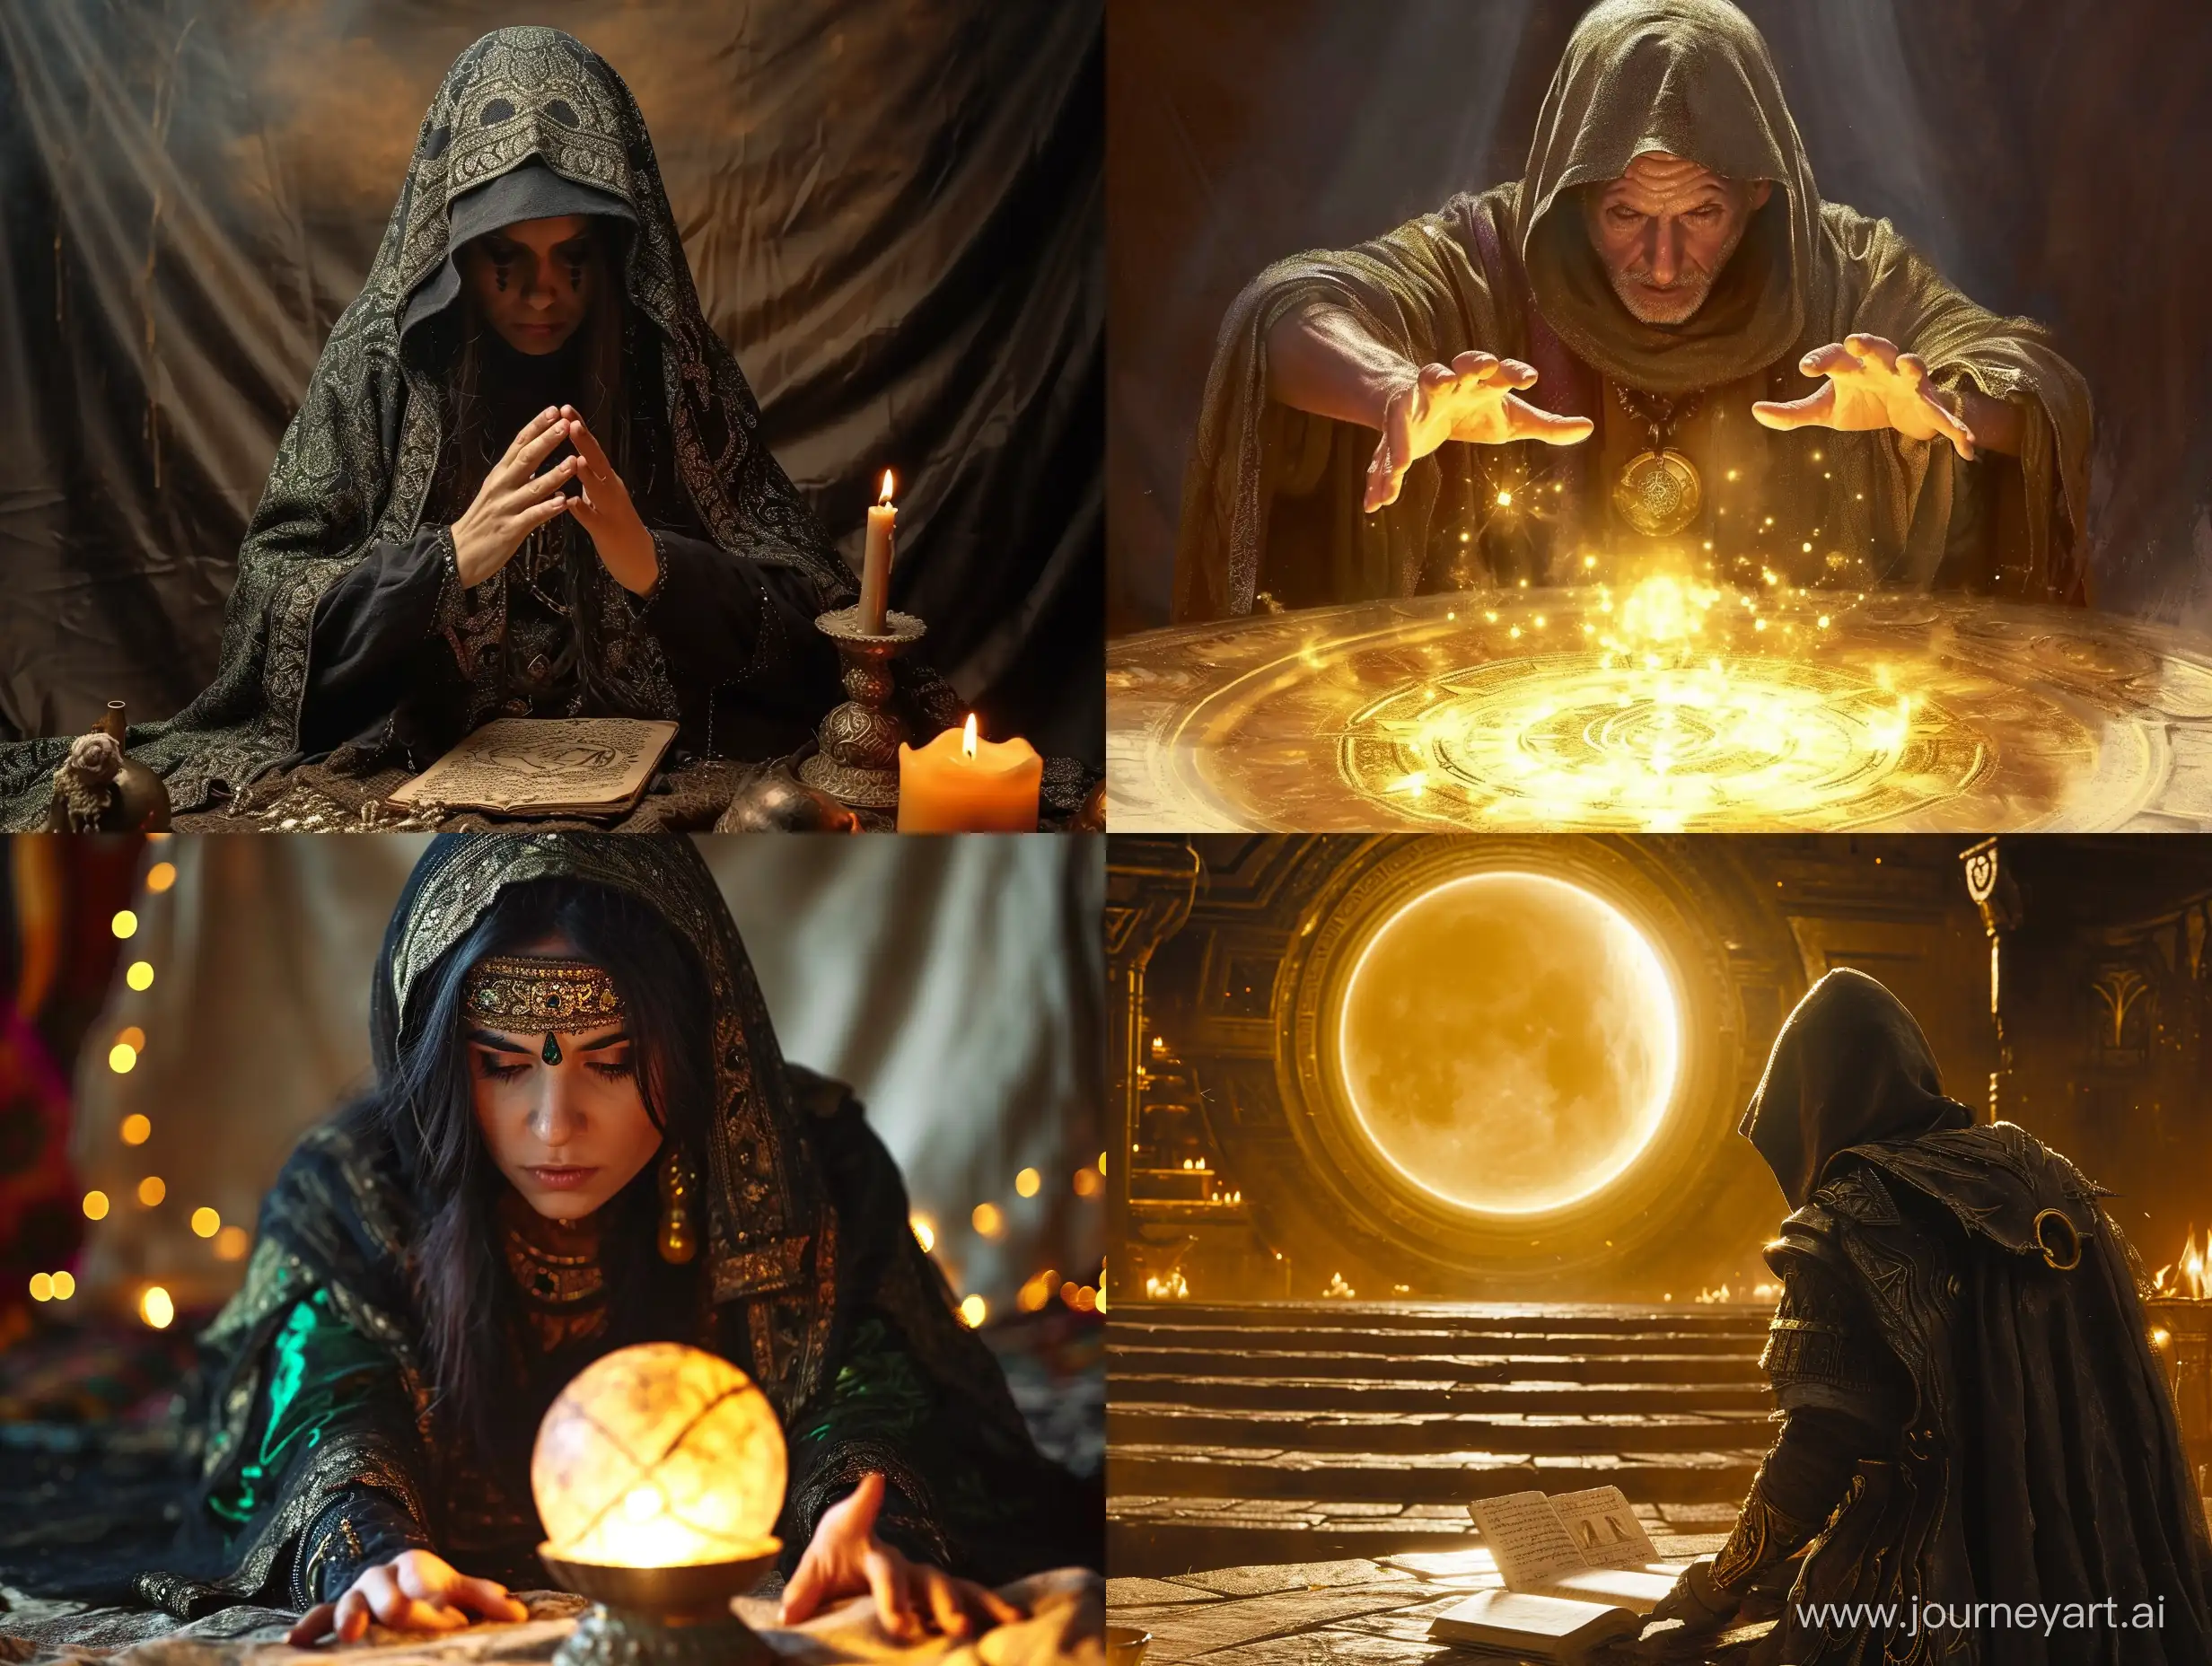 Mystical-Oracle-Prophecy-Art-with-6-Versions-and-43-Aspect-Ratio